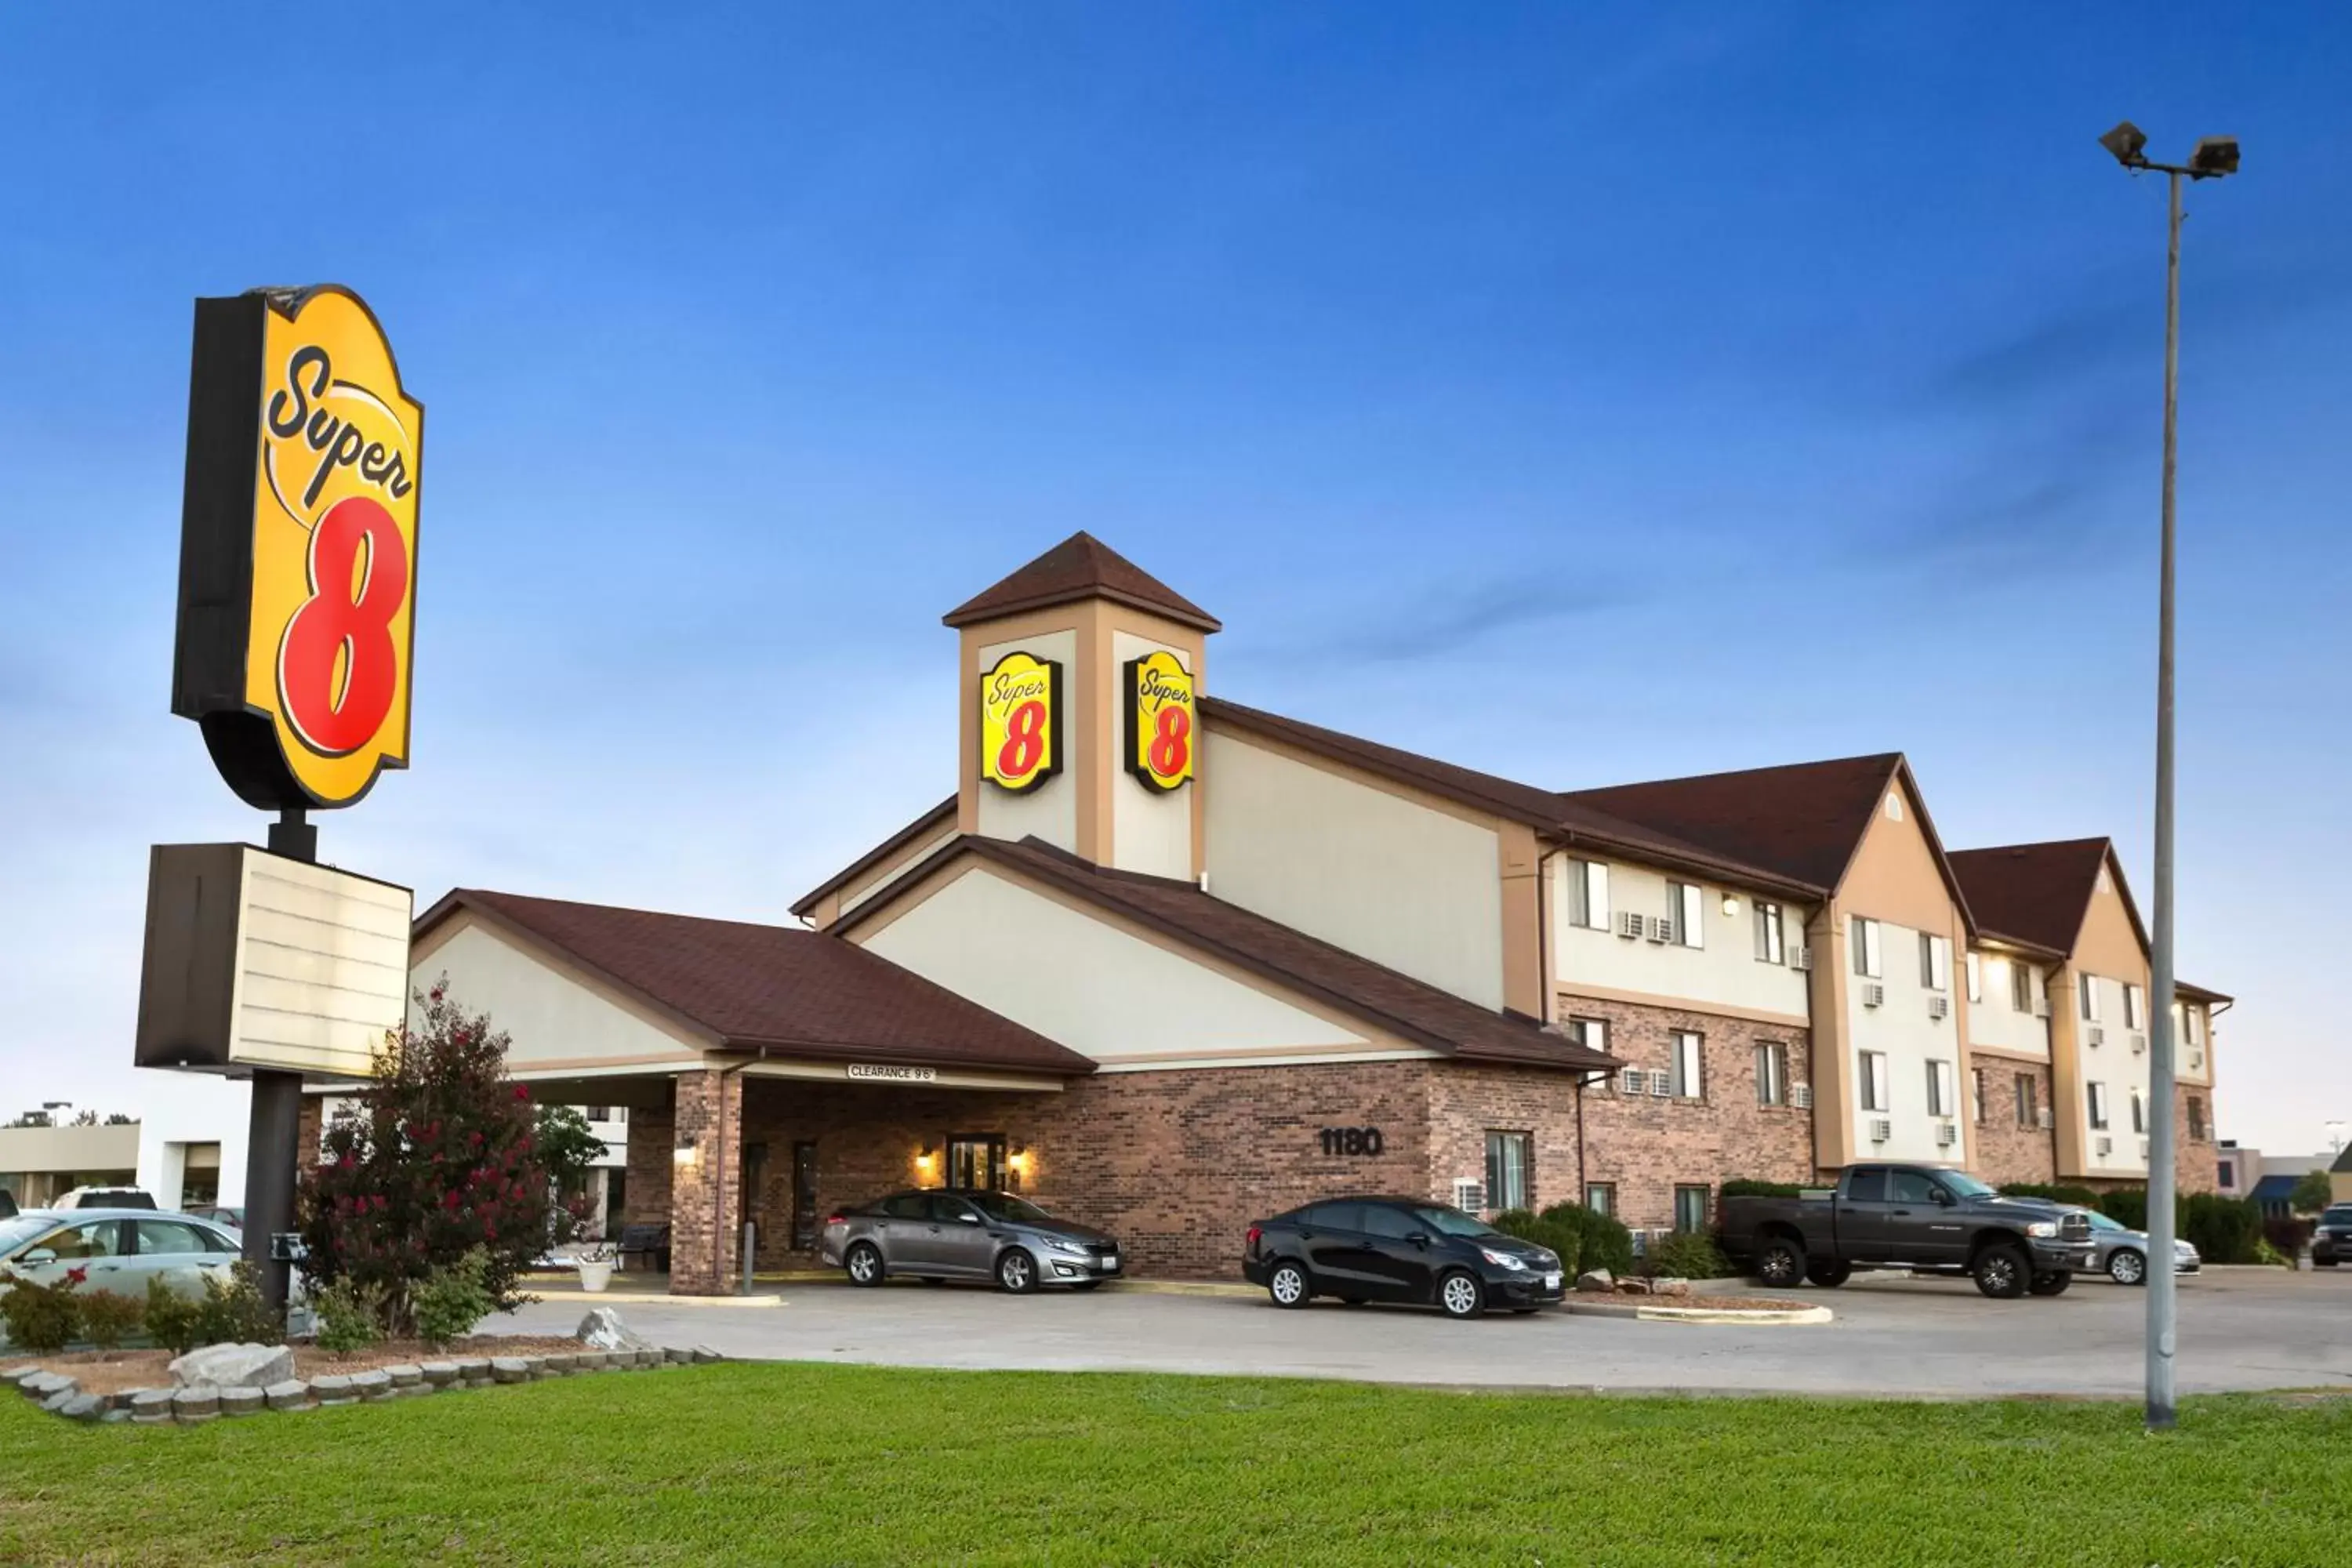 Nearby landmark, Property Building in Super 8 by Wyndham Carbondale